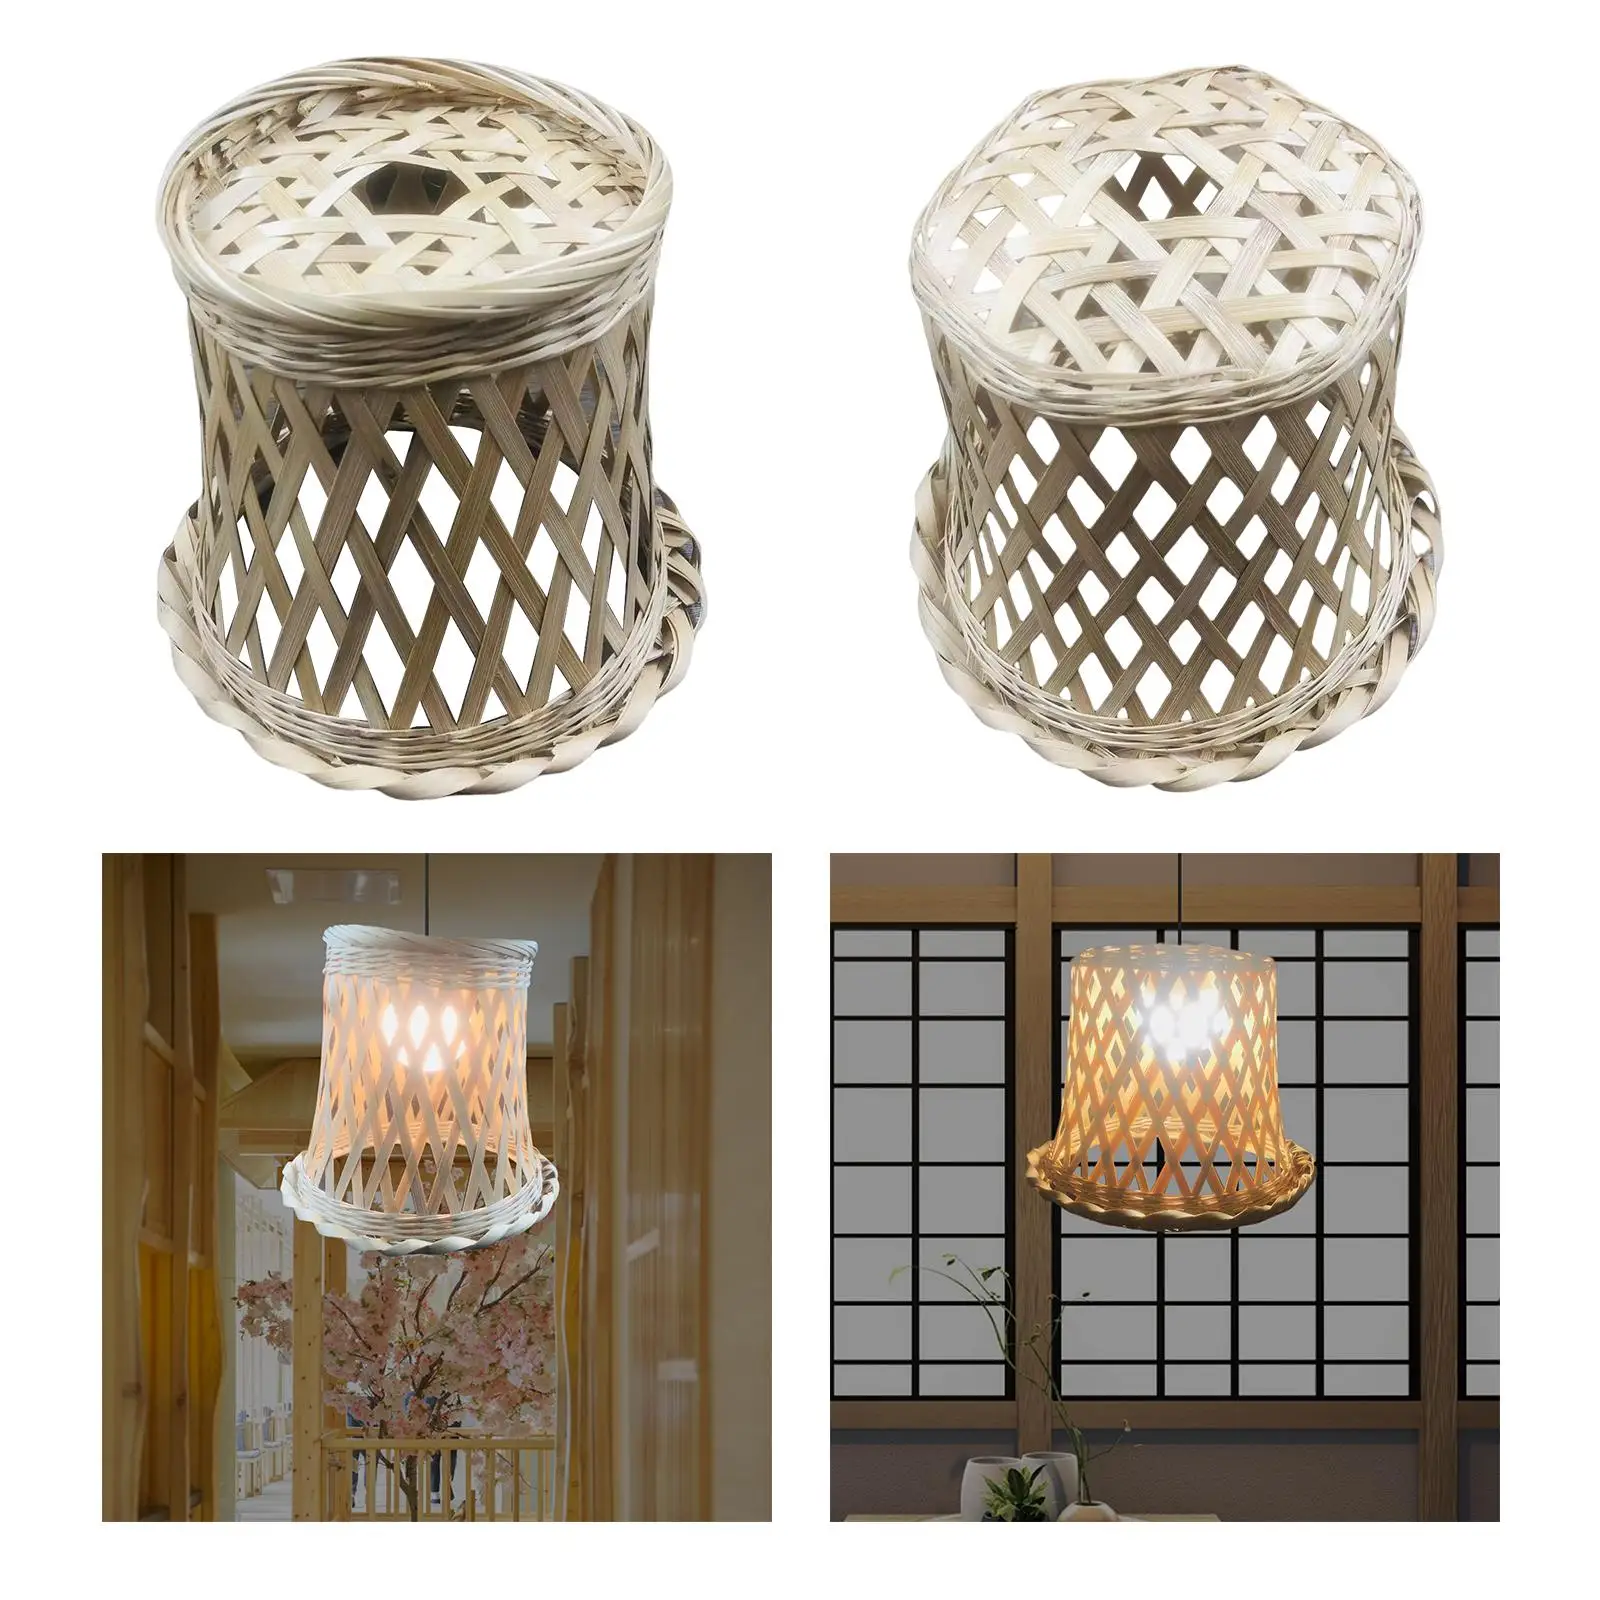 Bamboo Lamp Shade Covers LED Pendant Light for Ceiling Light Fixture Nursery Office